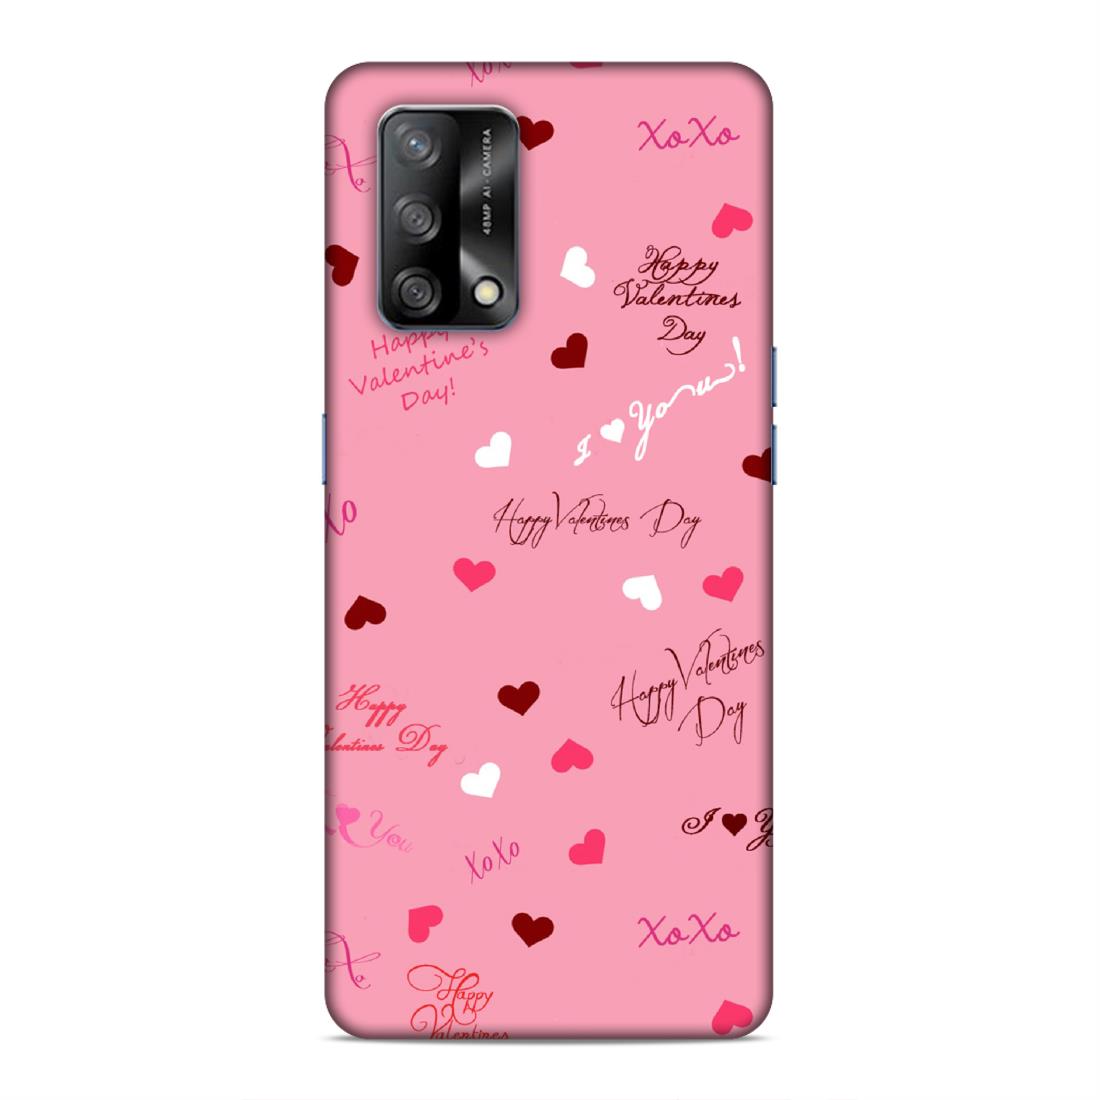 Happy Valentines Day Hard Back Case For Oppo F19 / F19s